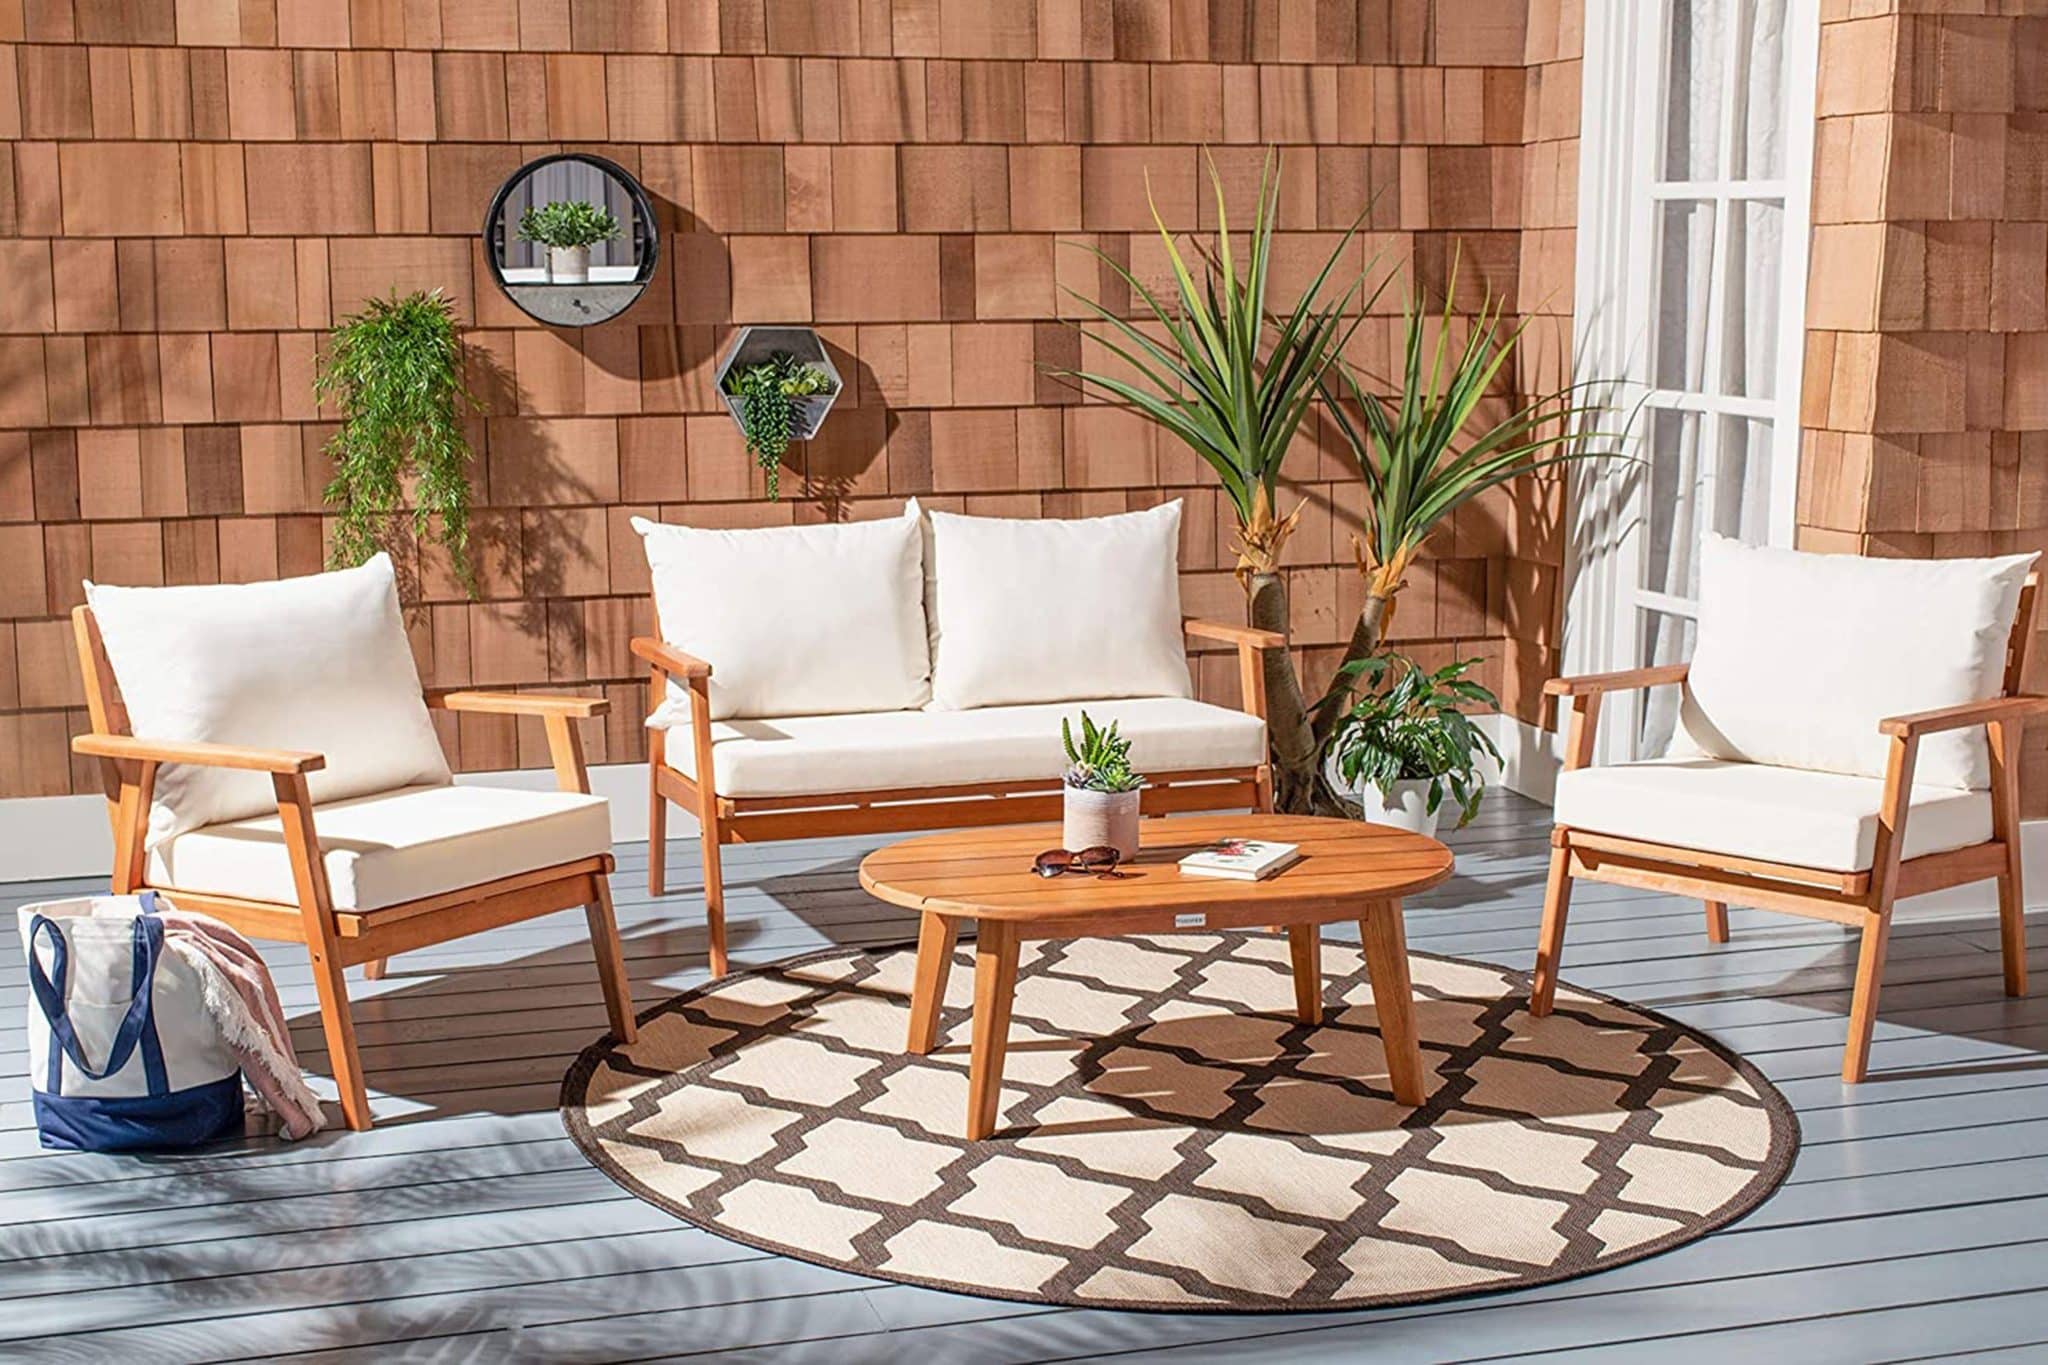 Is a Boho Coffee Table Suitable for Outdoor Use?